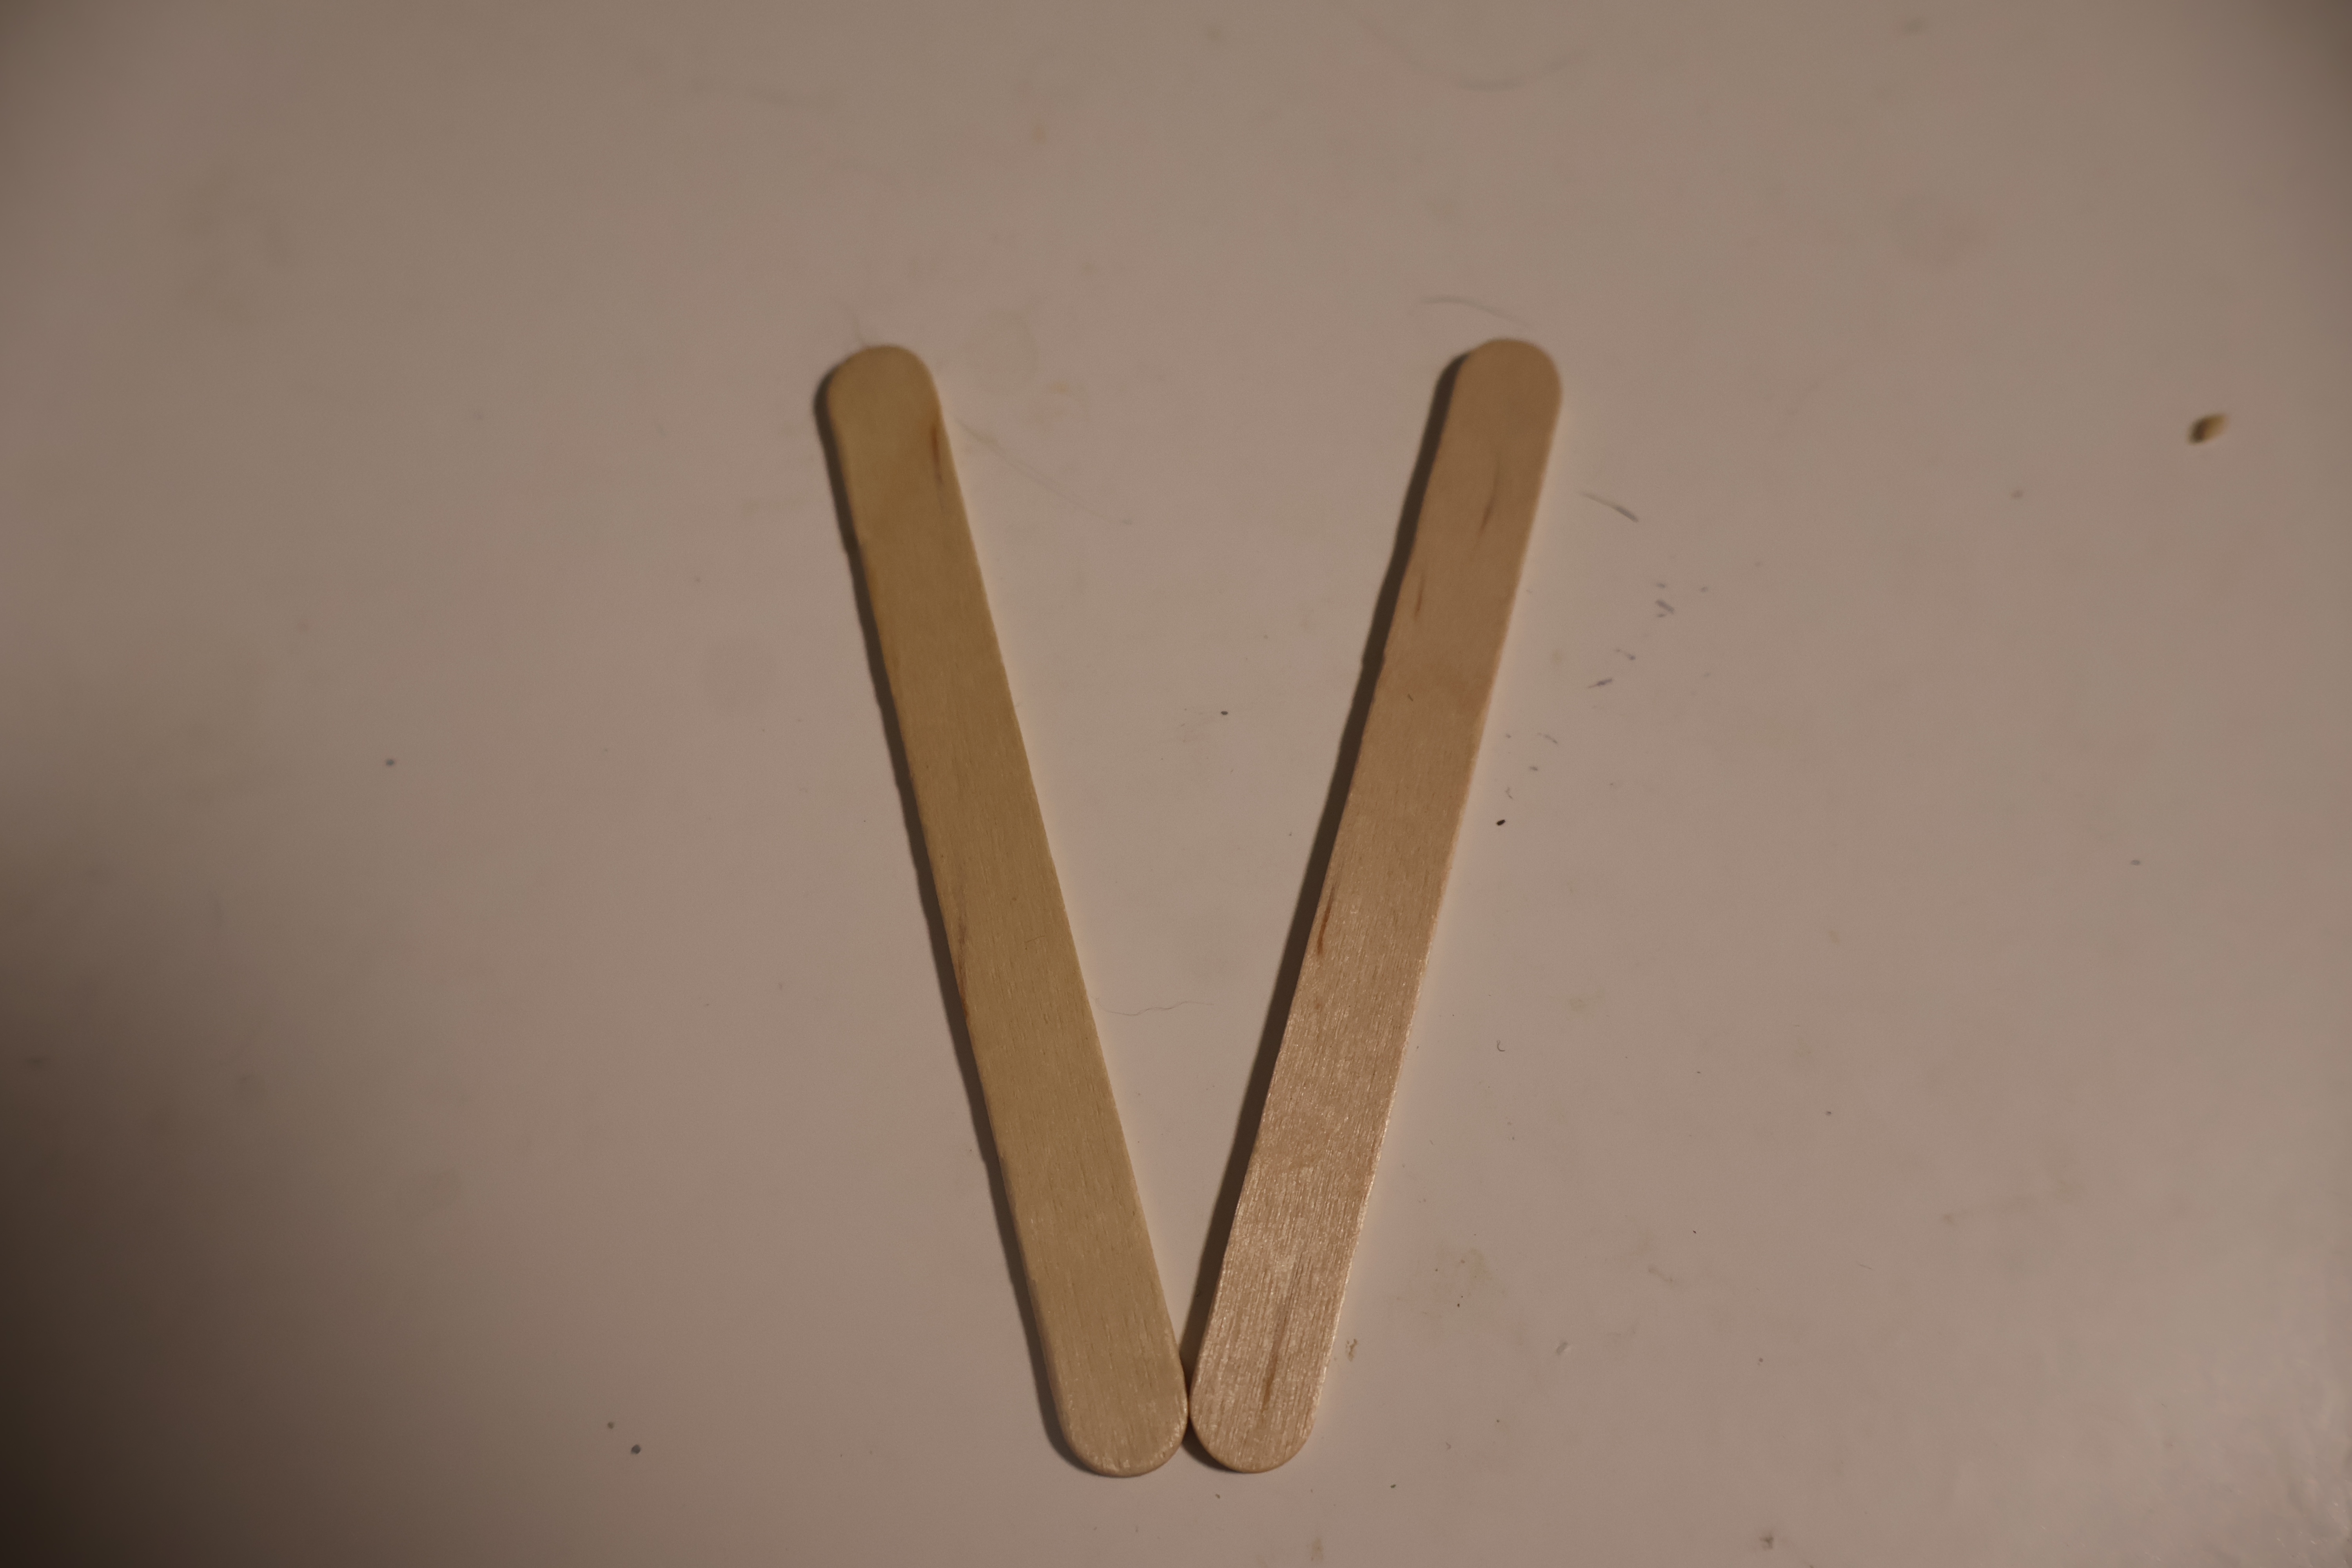 Step 1: Make a V shape with the two paddle pop stick